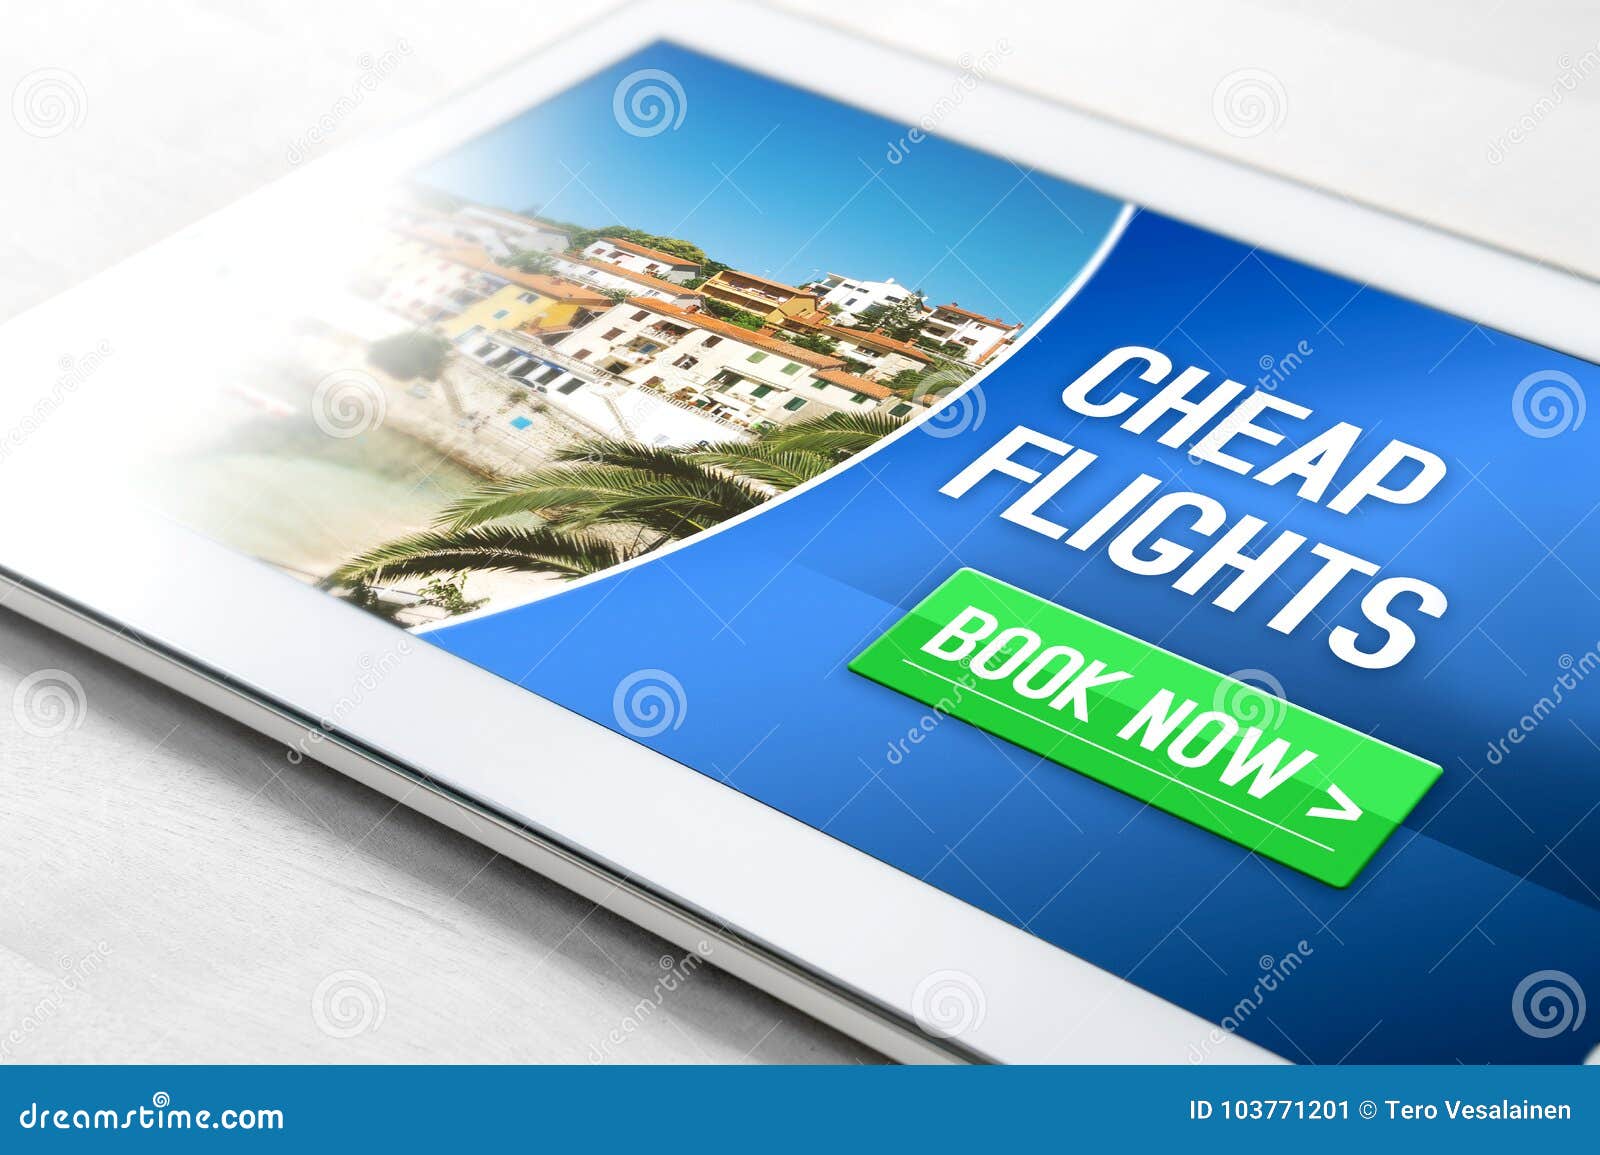 cheap flights for sale on internet